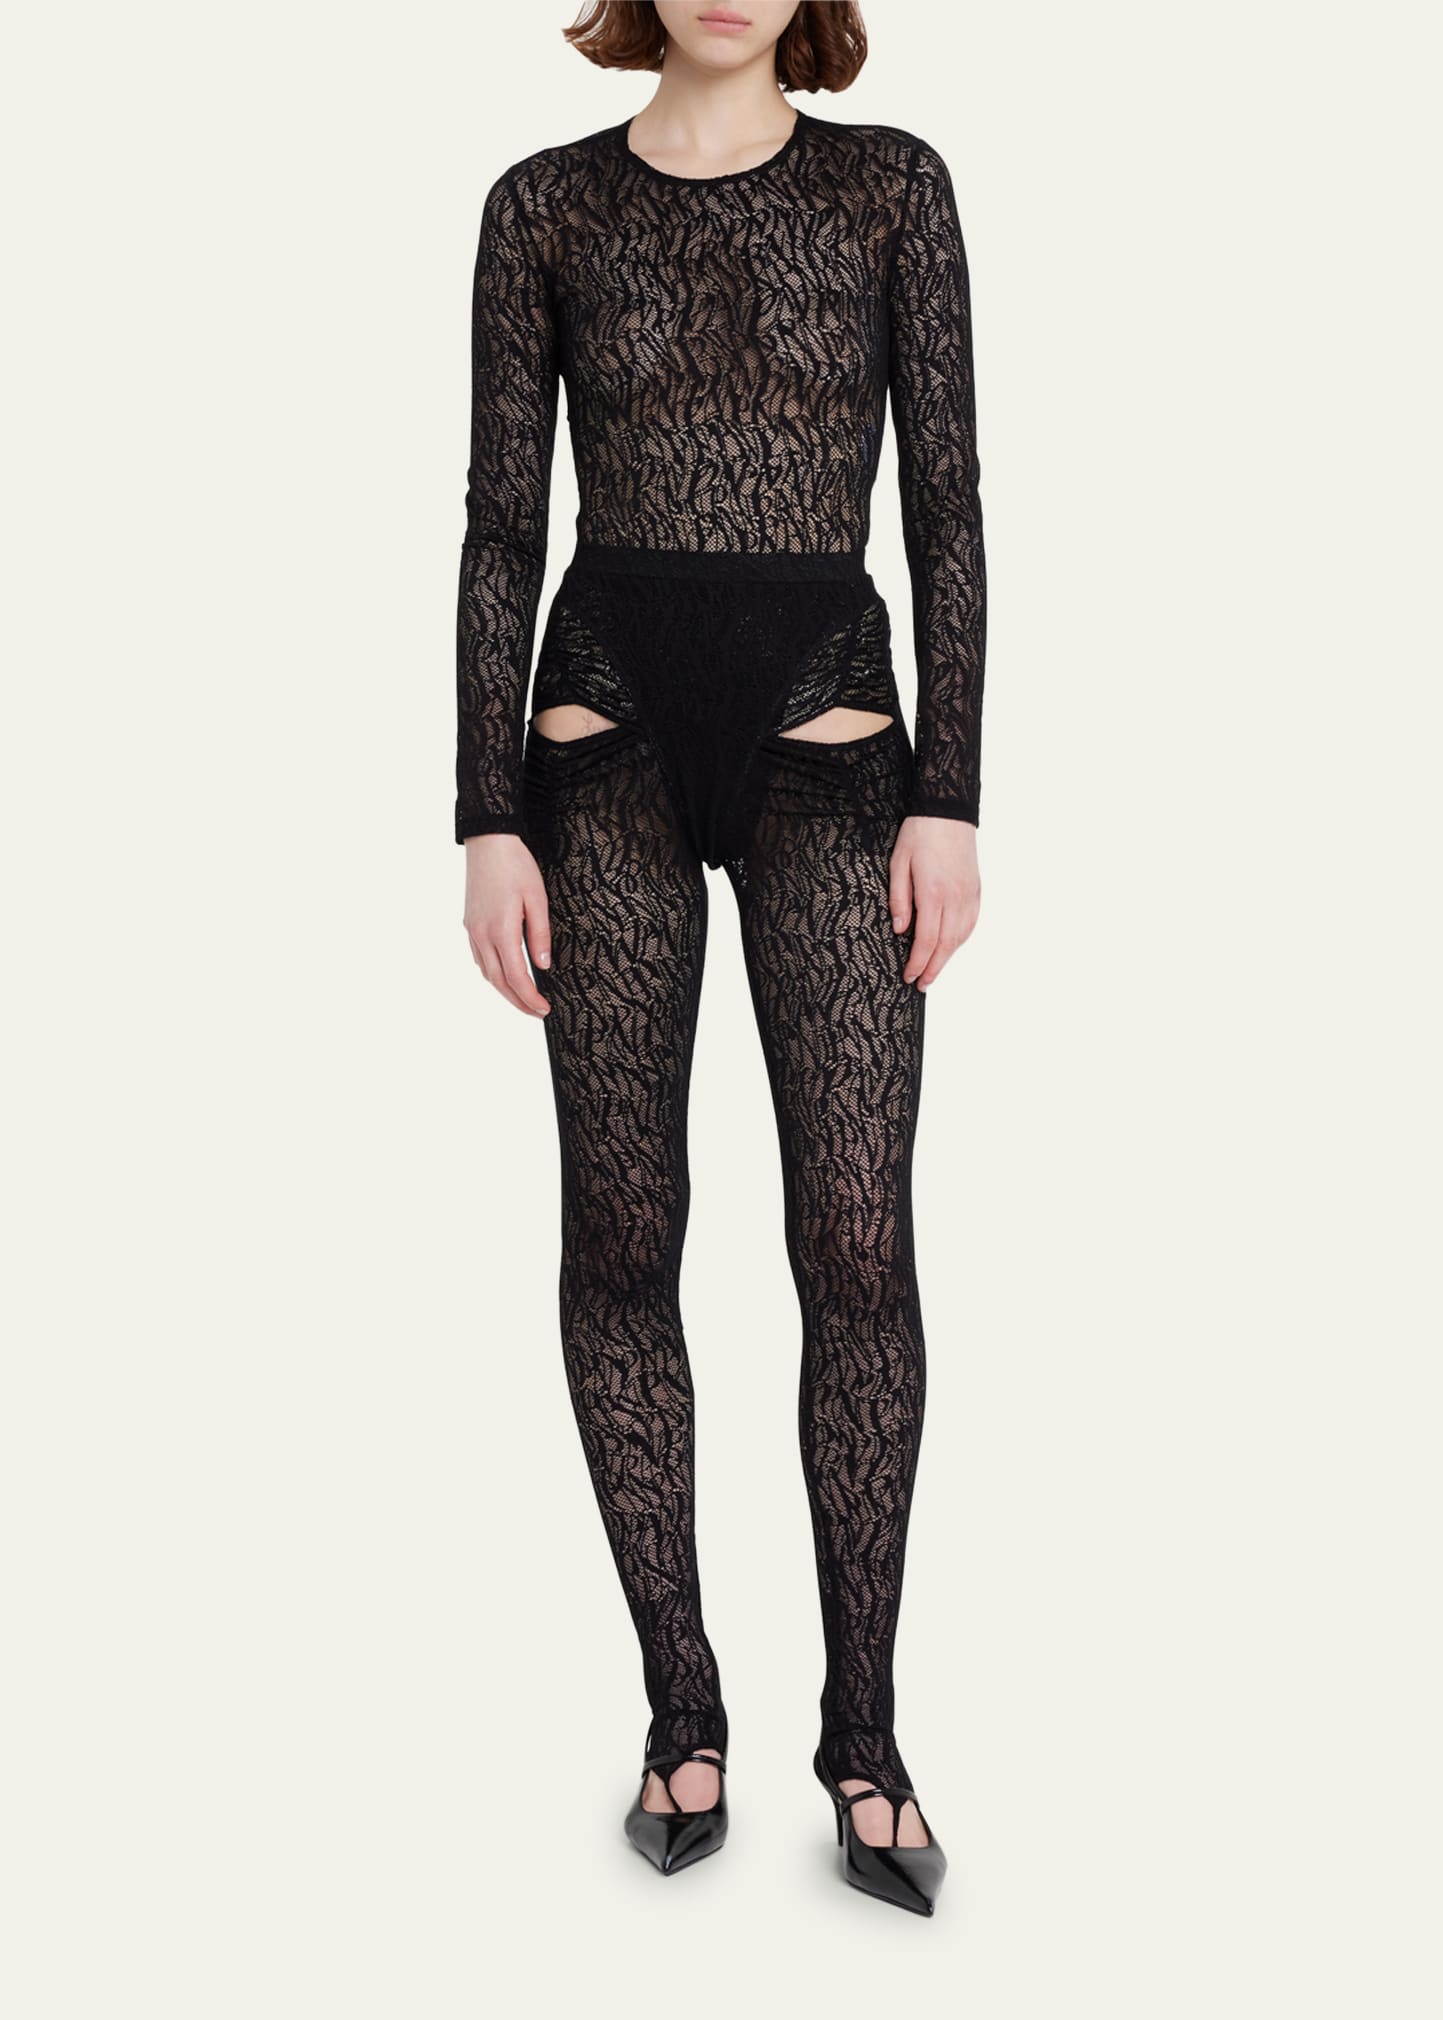 Puppets And Puppets Logo Lace Cutout Stirrup Leggings In Black | ModeSens